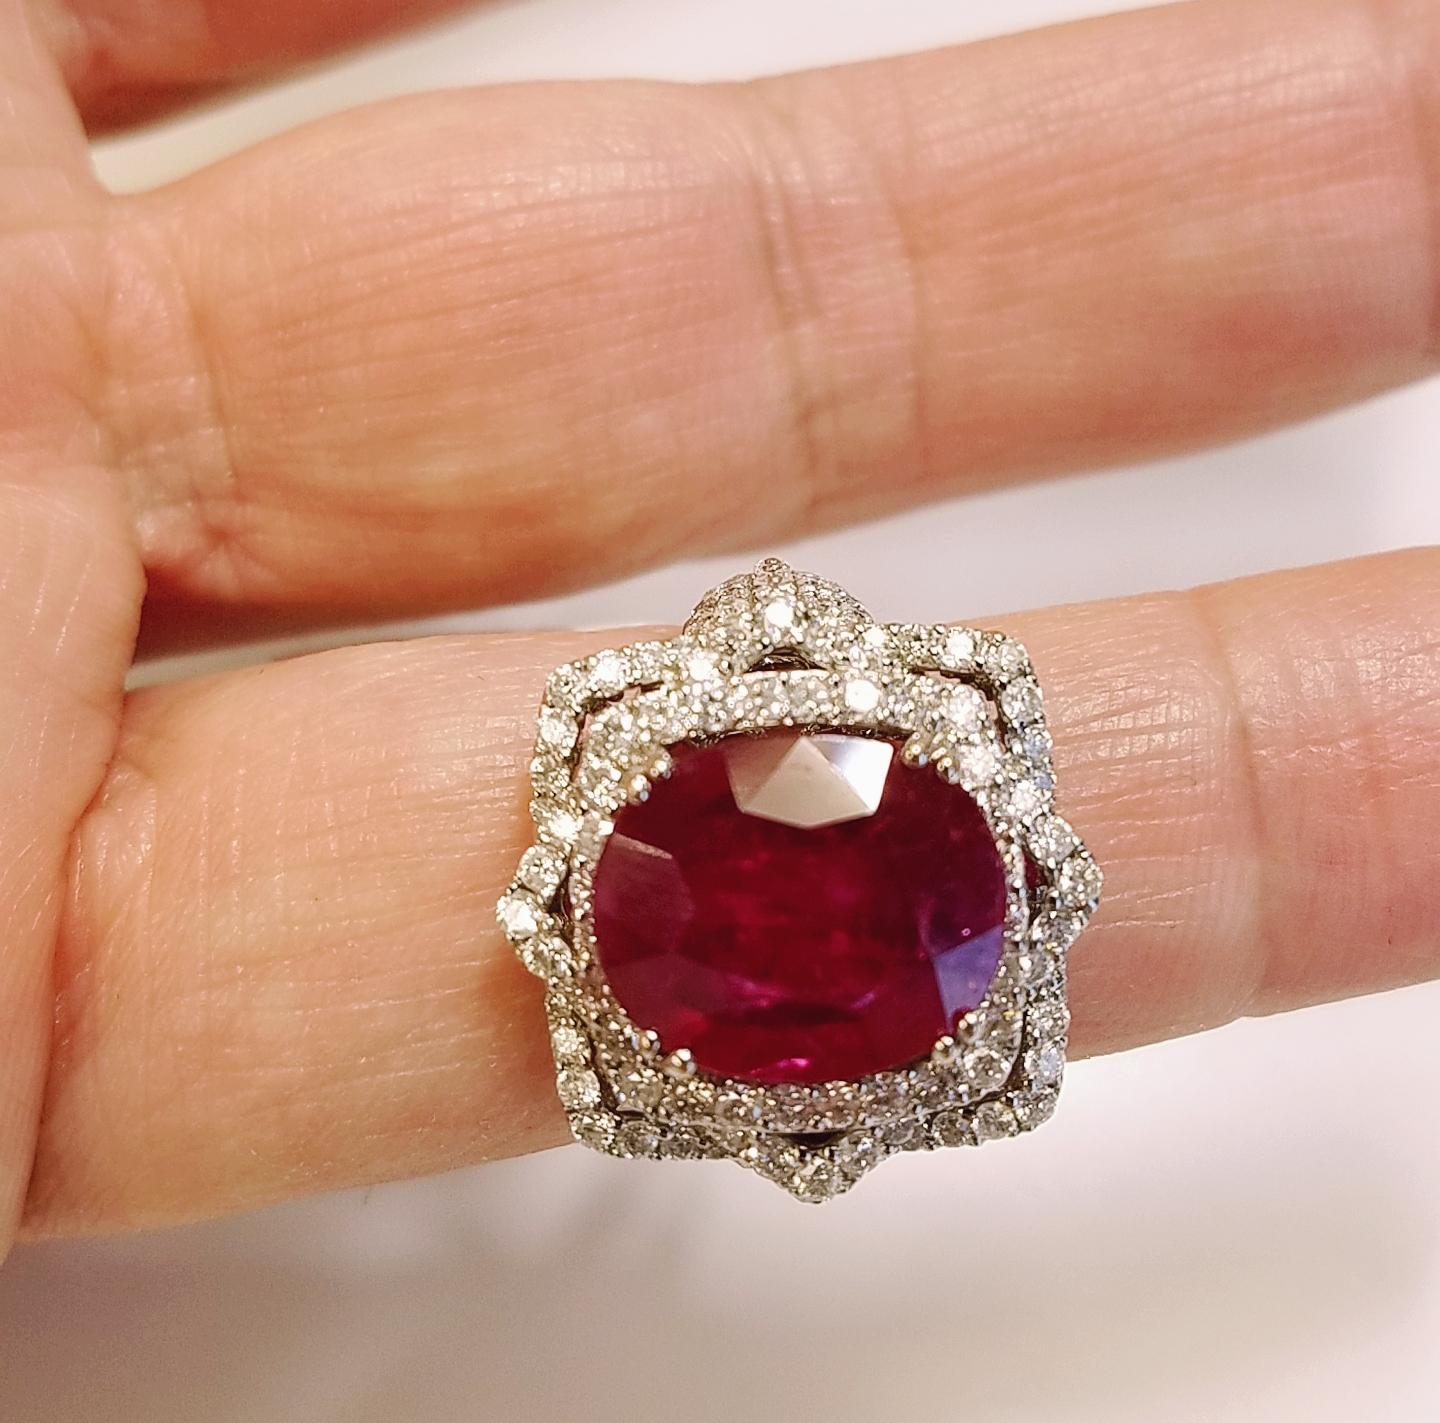 Contemporary 18 Karat White Gold Emerald Cut Ruby and Diamond Ring